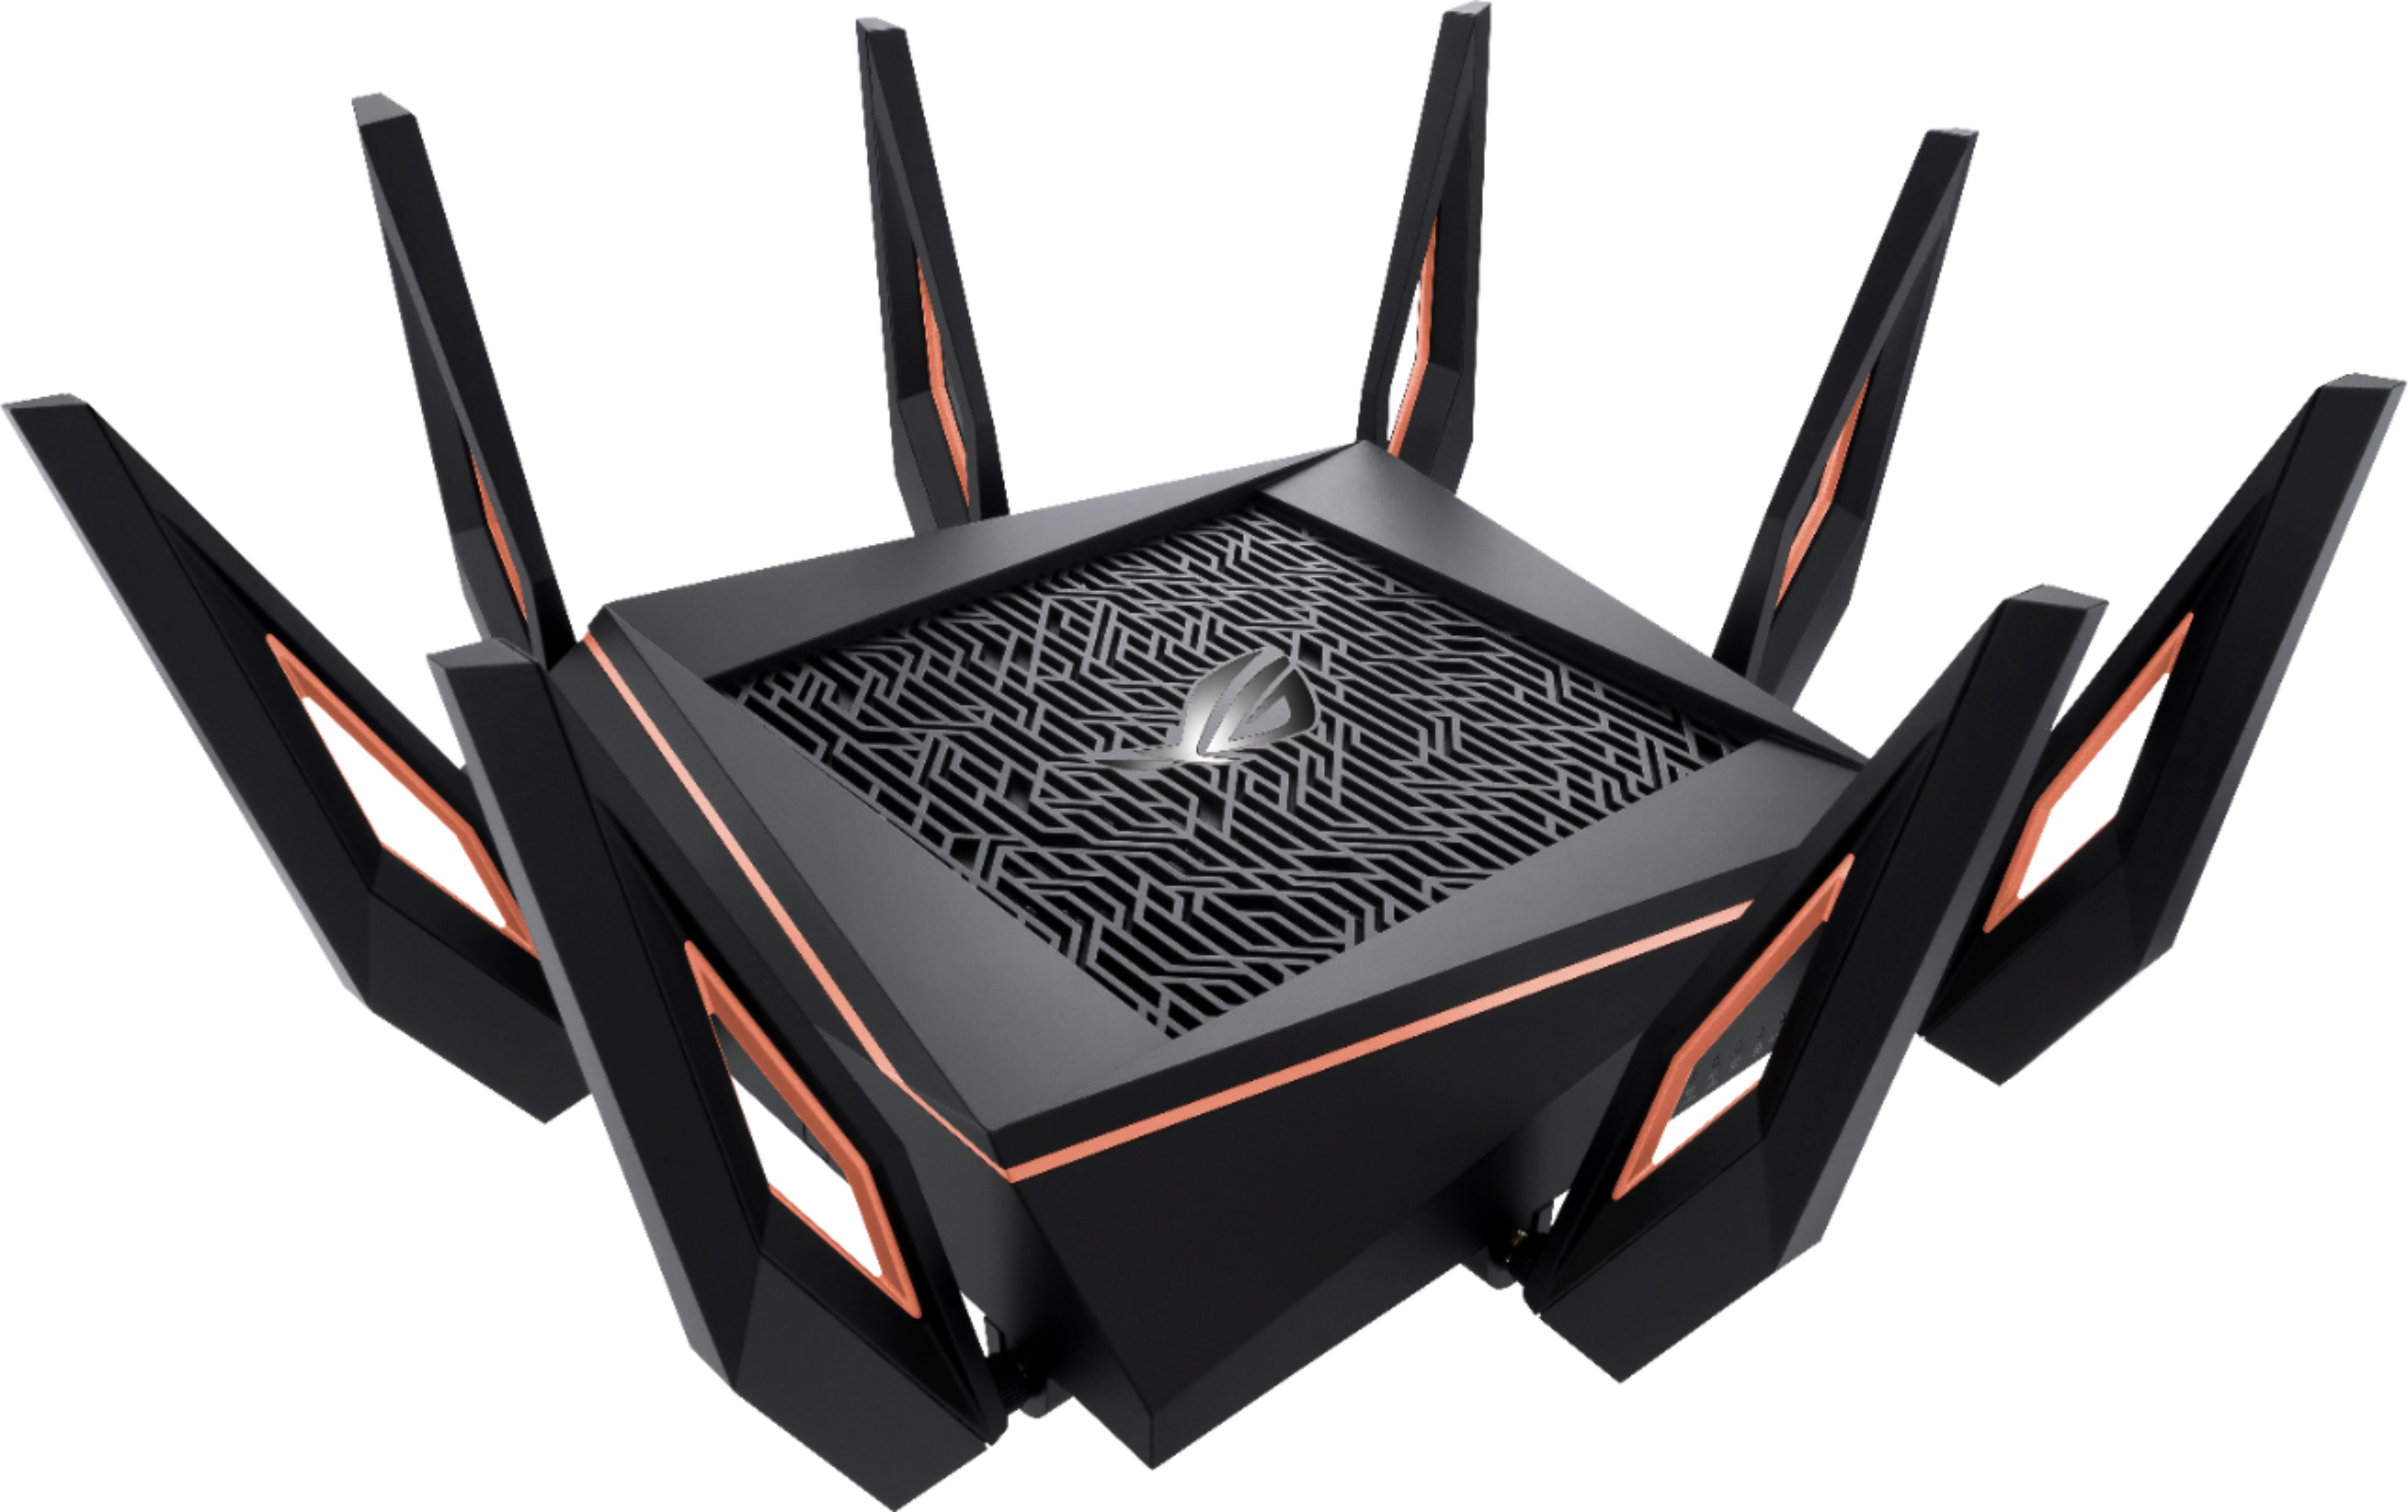 Buy: ASUS ROG Rapture GT-AX11000 Tri-band WiFi 6 Gaming Router, 2.5G GT-AX11000